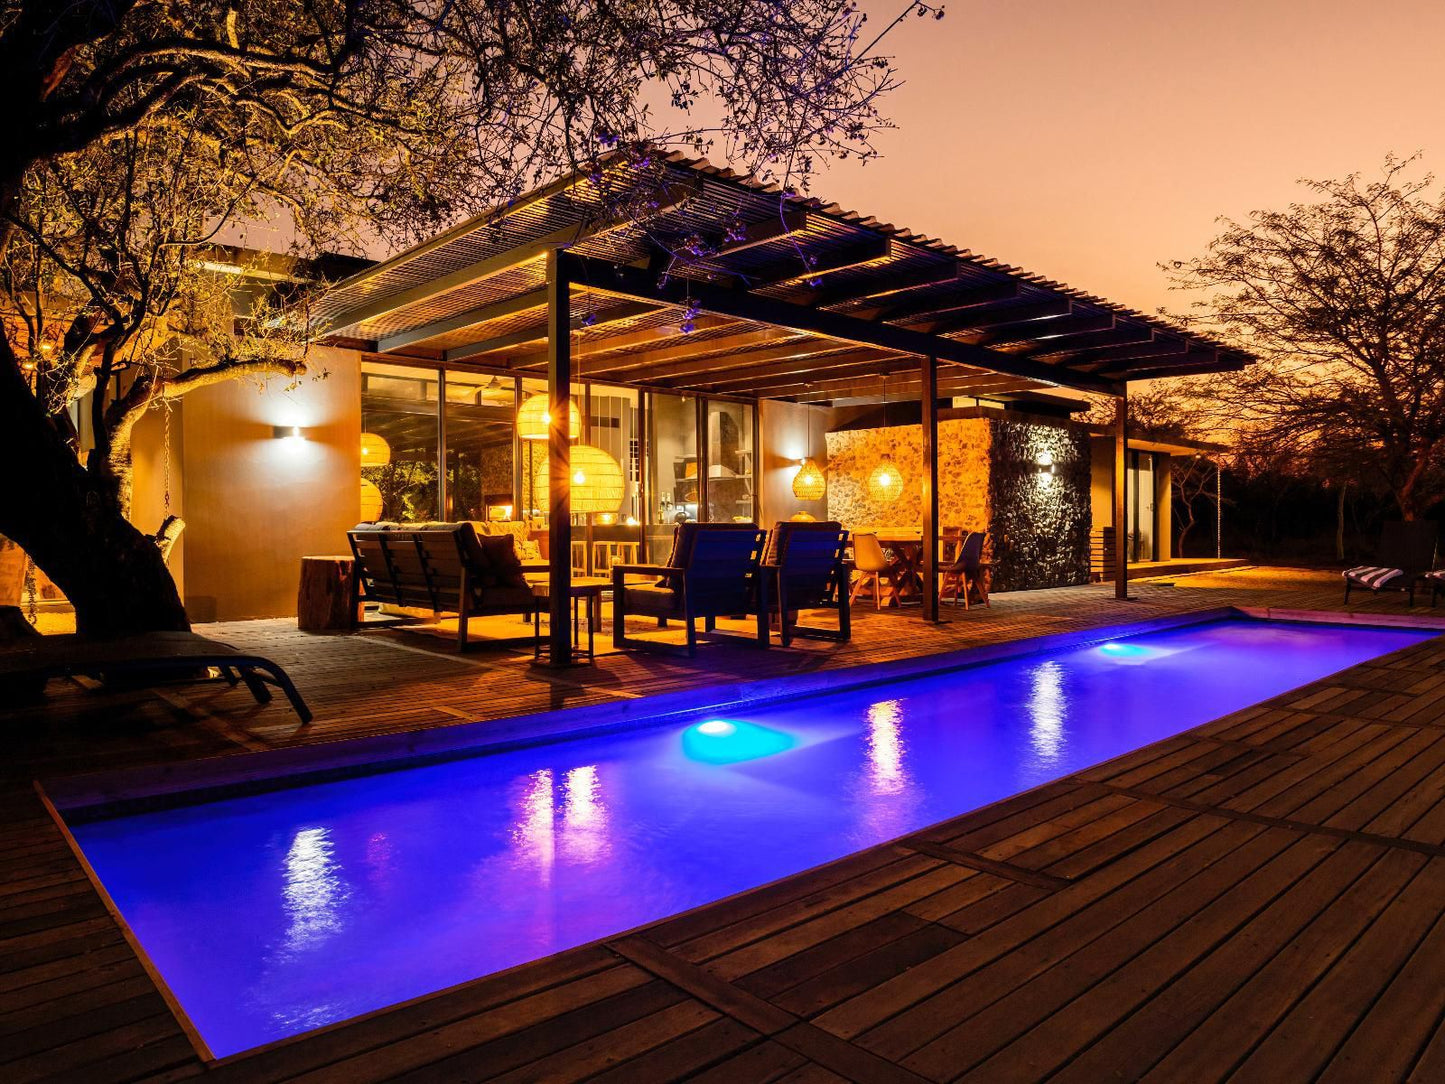 Entabeni Hospitality Entabeni Private Game Reserve Limpopo Province South Africa Colorful, Swimming Pool